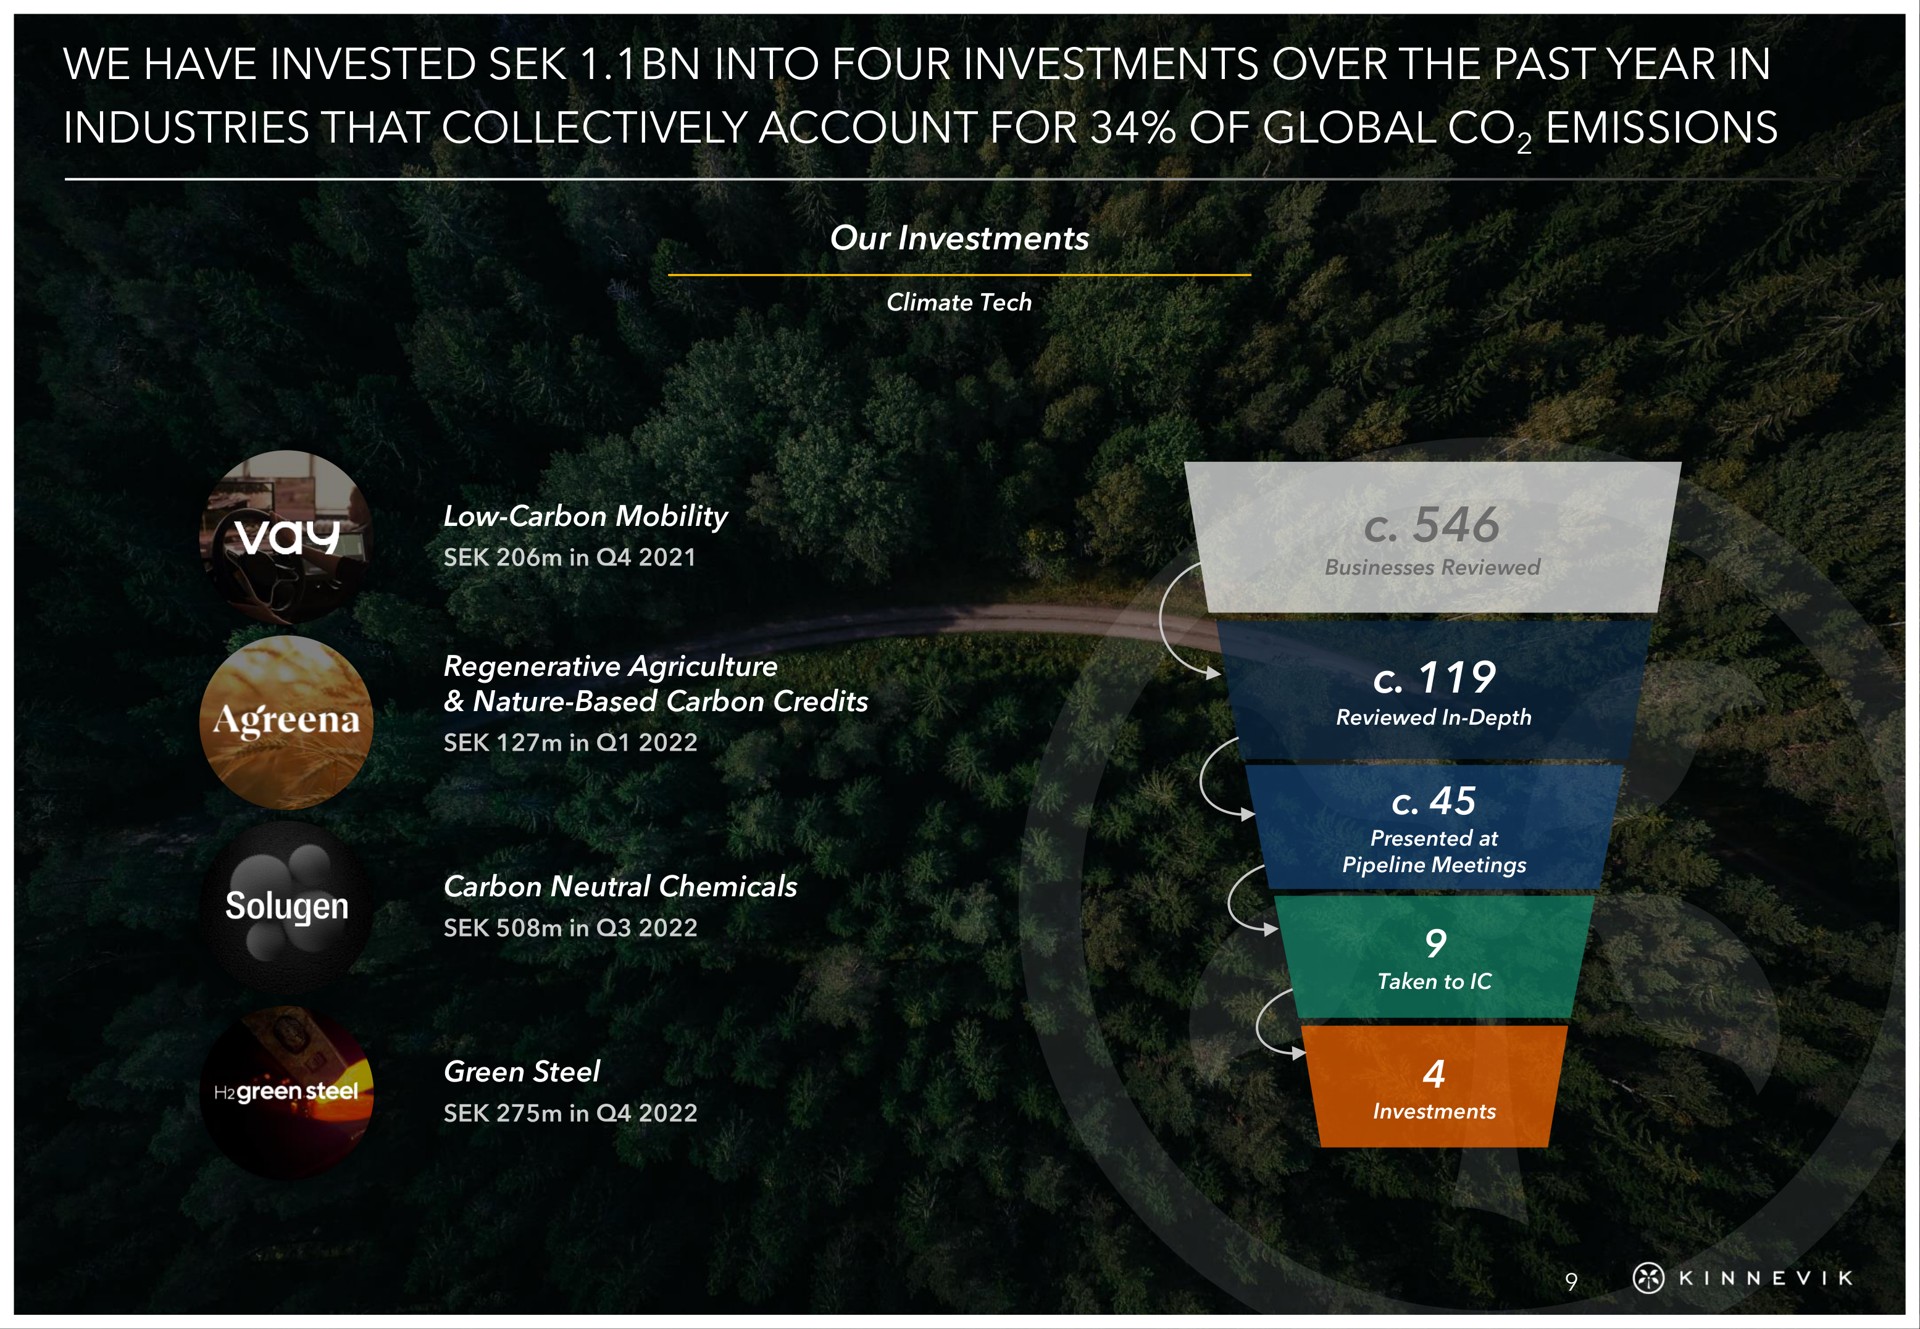 we have invested into four investments over the past year in industries that collectively account for of global emissions | Kinnevik